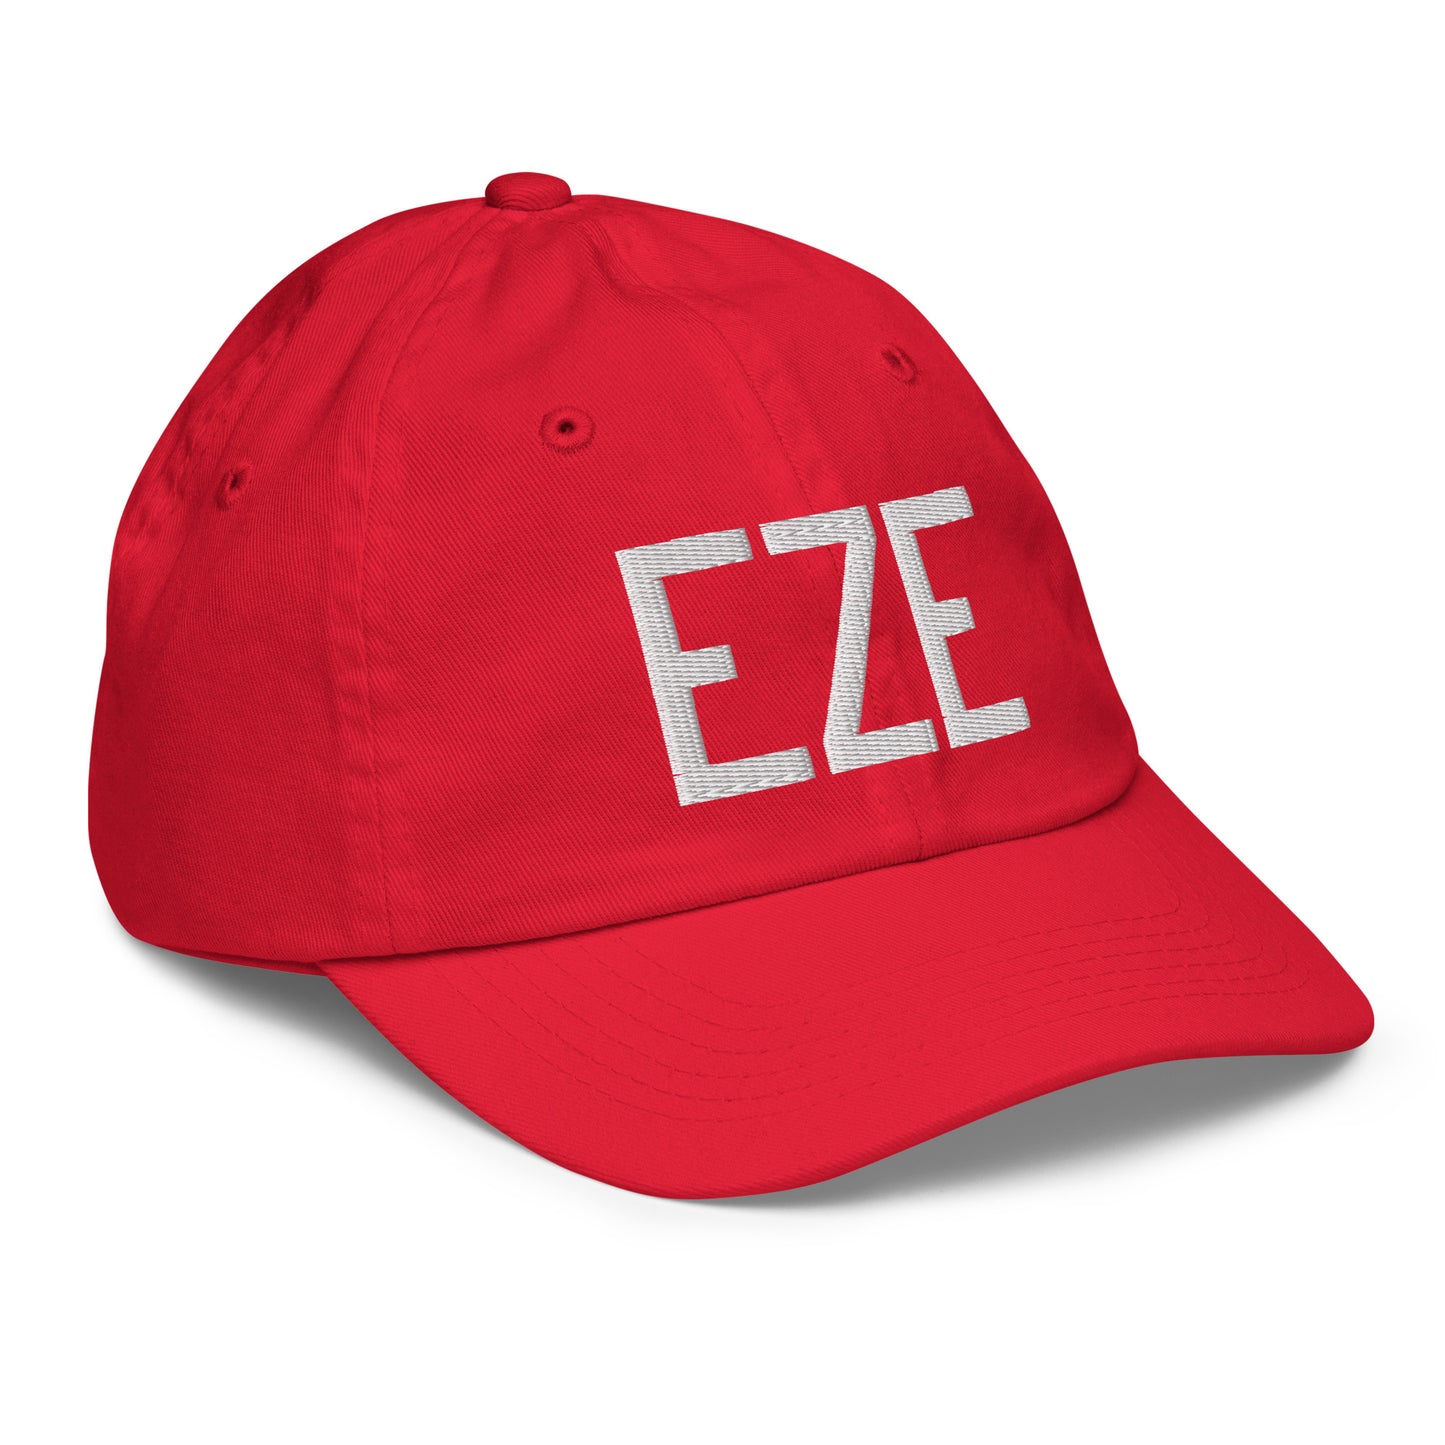 Airport Code Kid's Baseball Cap - White • EZE Buenos Aires • YHM Designs - Image 18